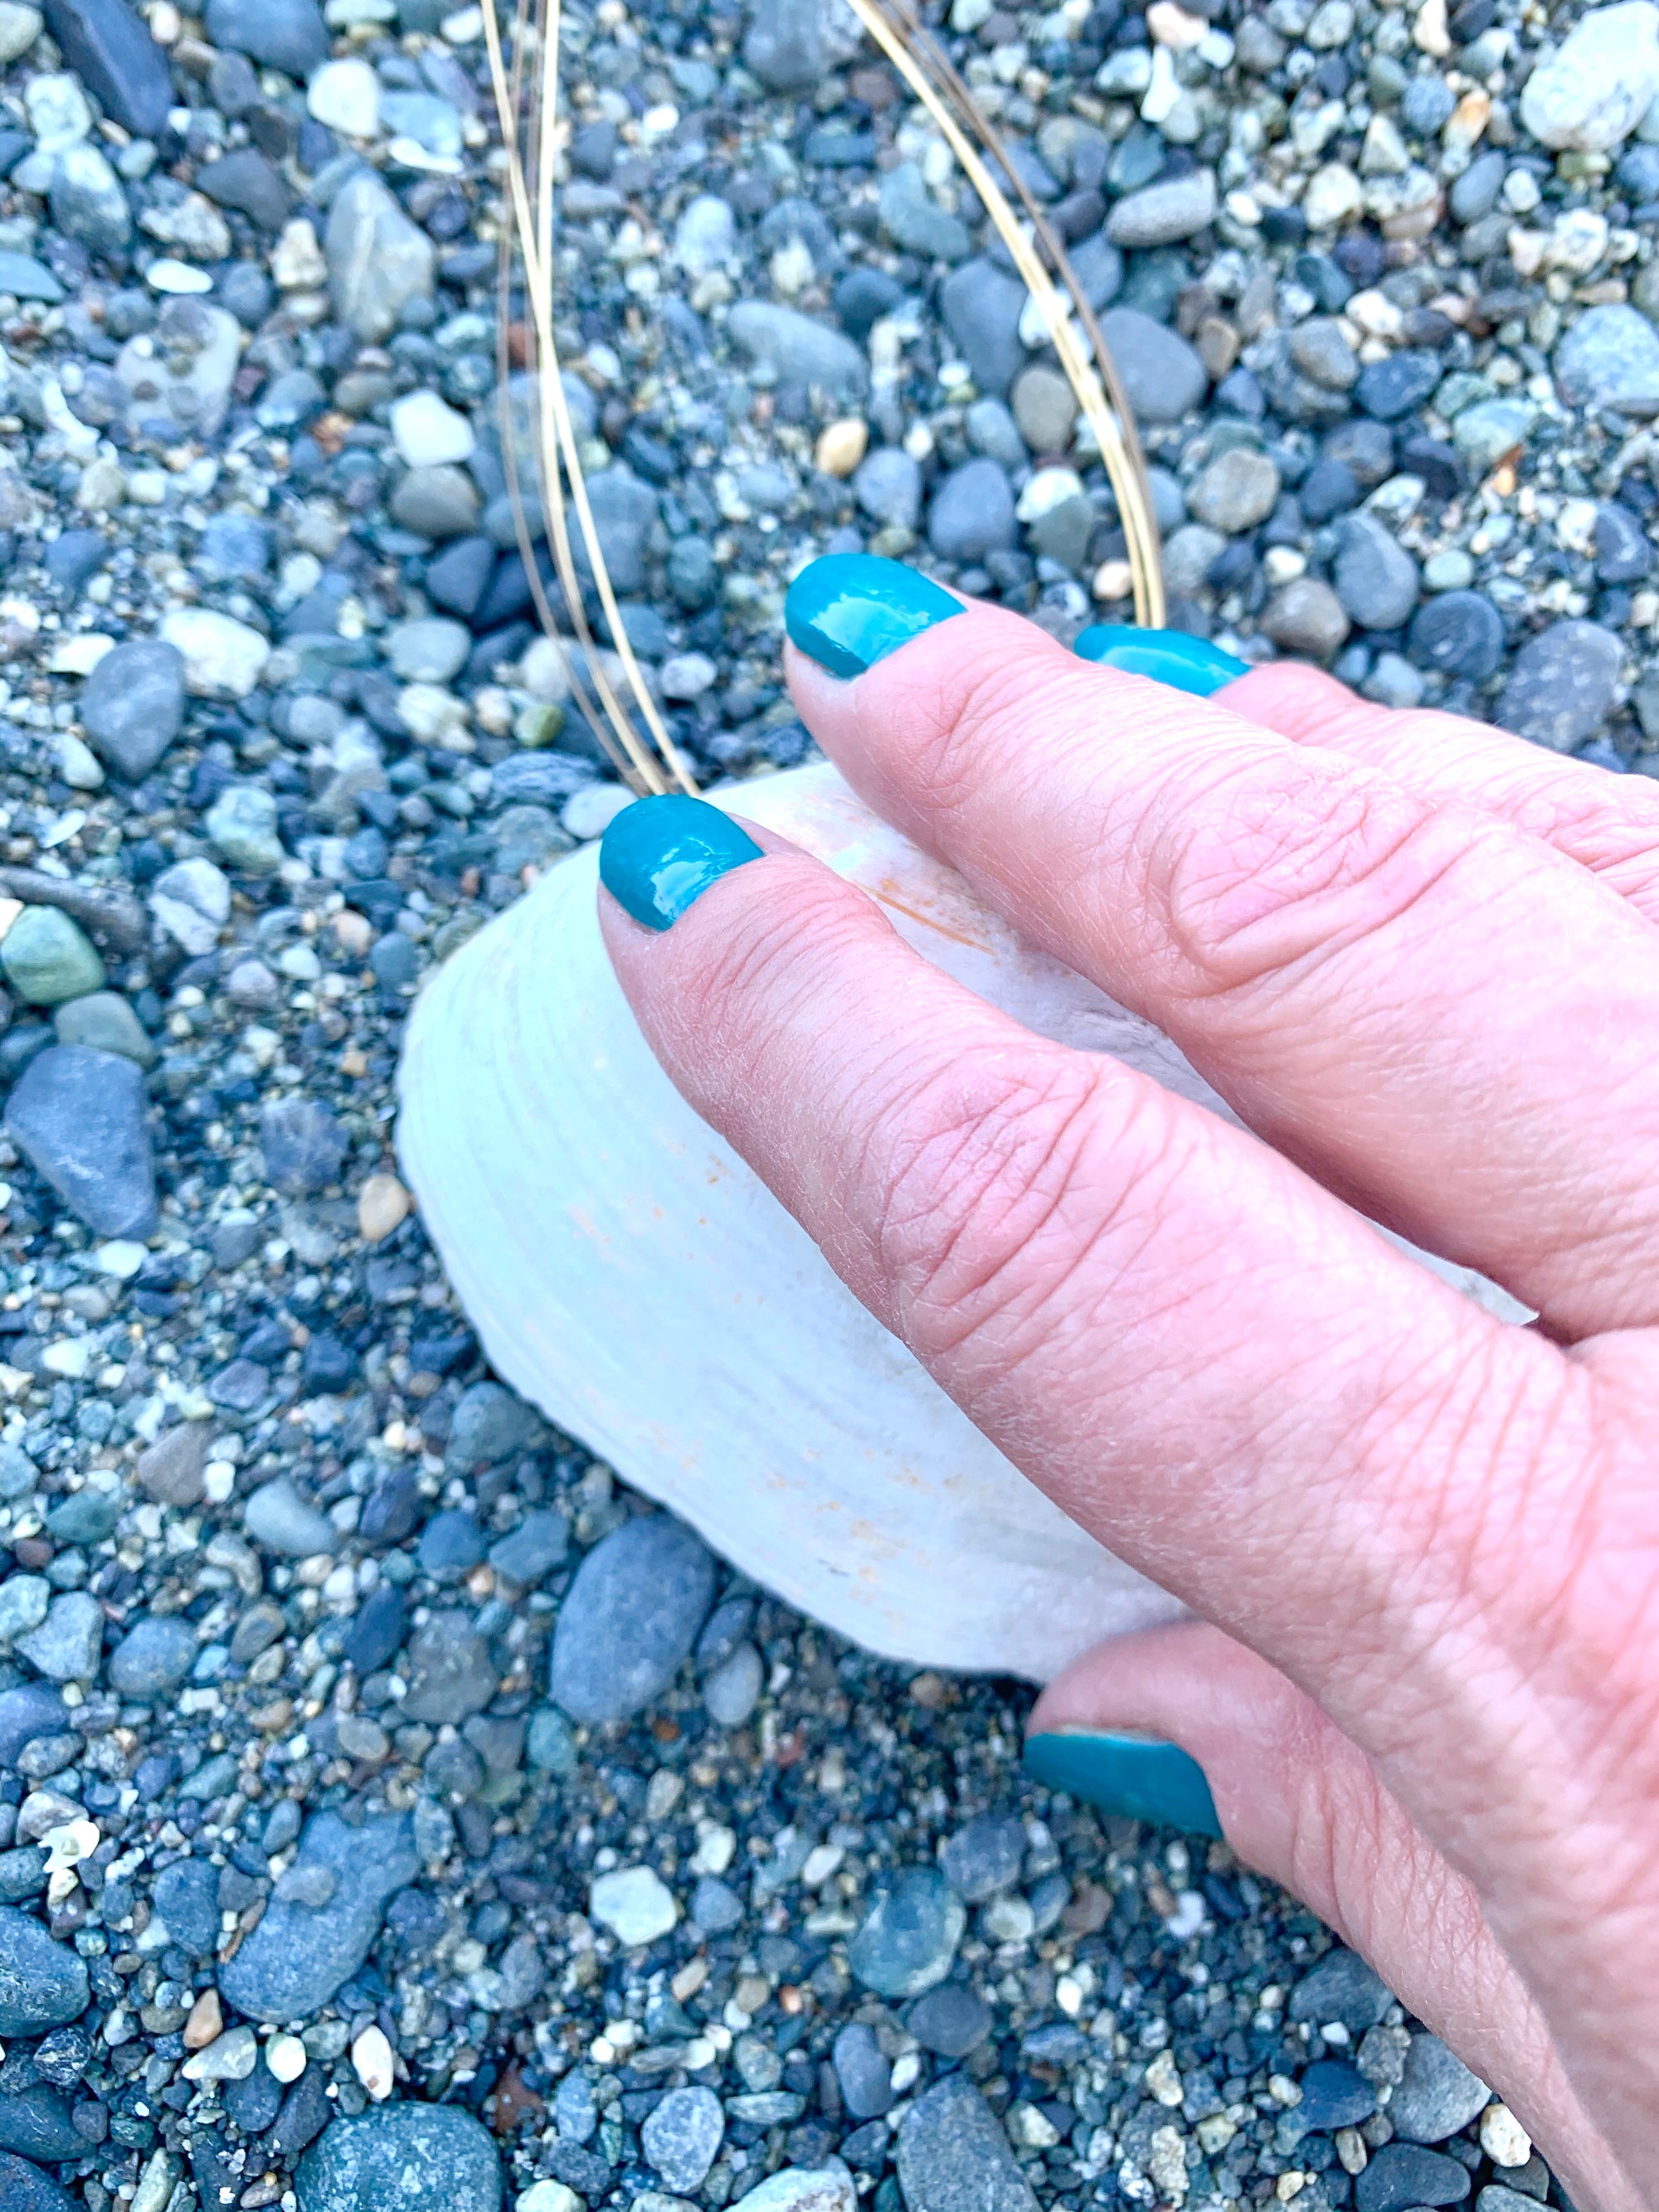 Seashell on beach and blue nails